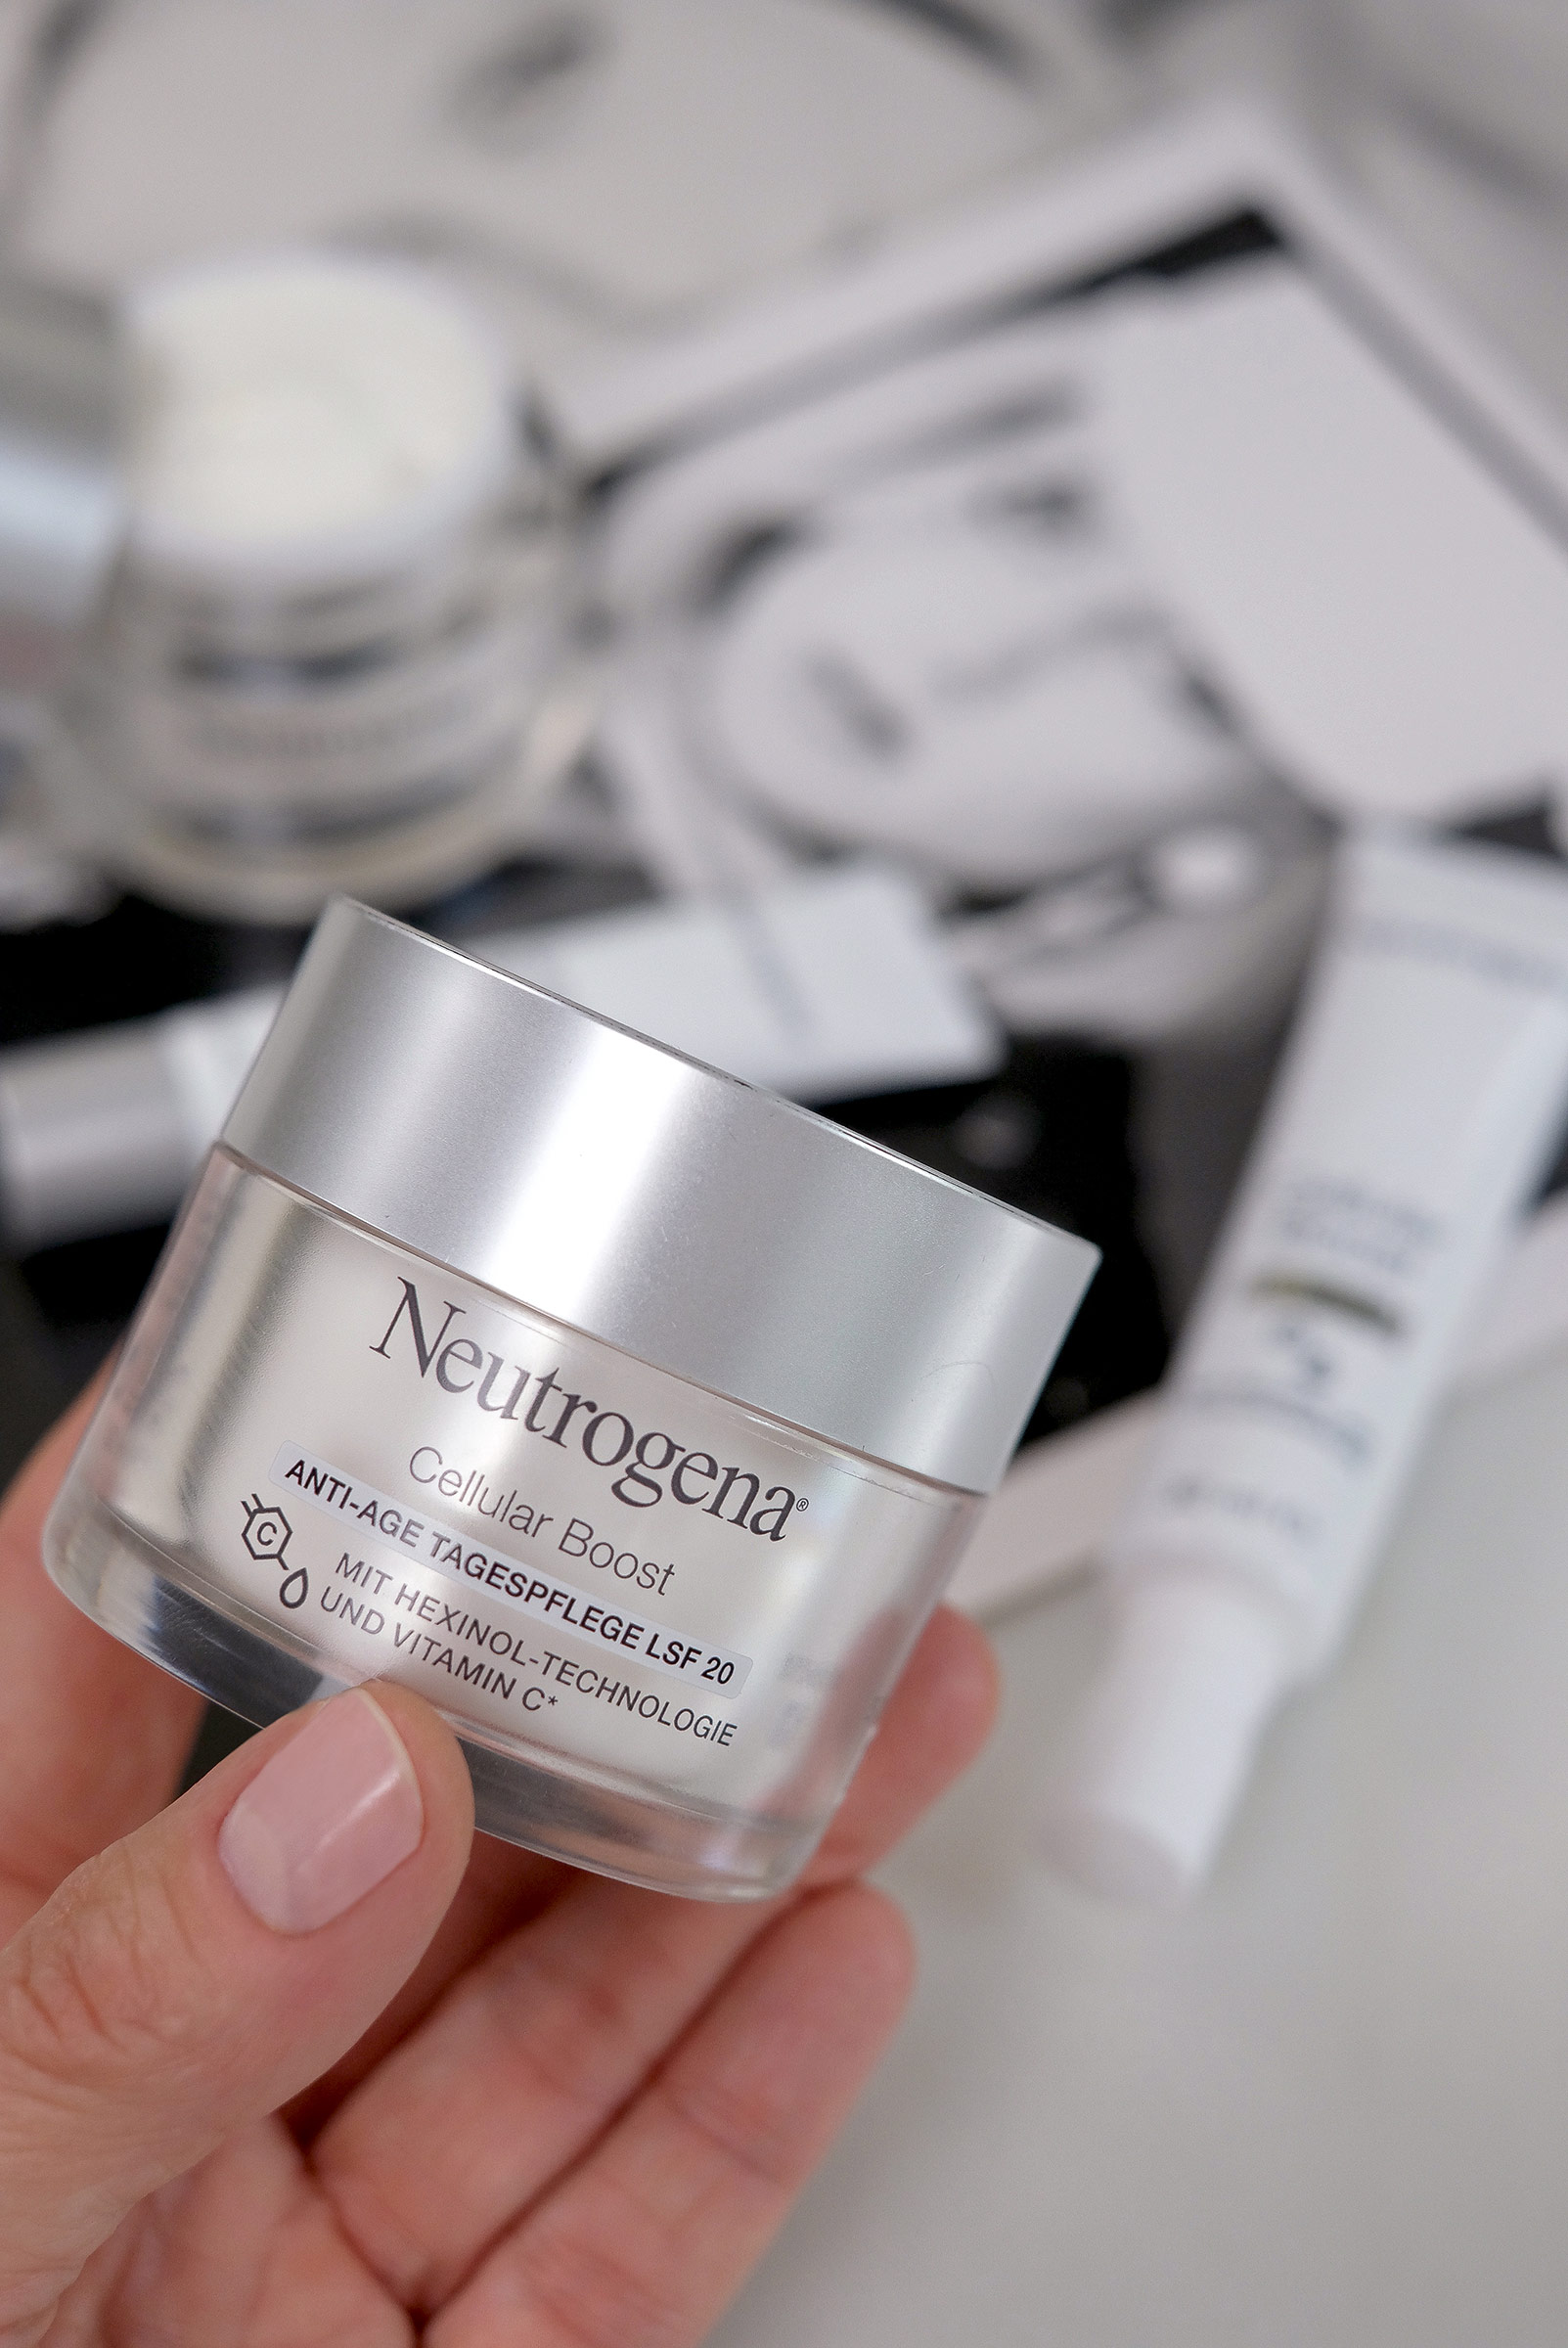 neutrogena, cellular boost, product, skincare, holded by a hand